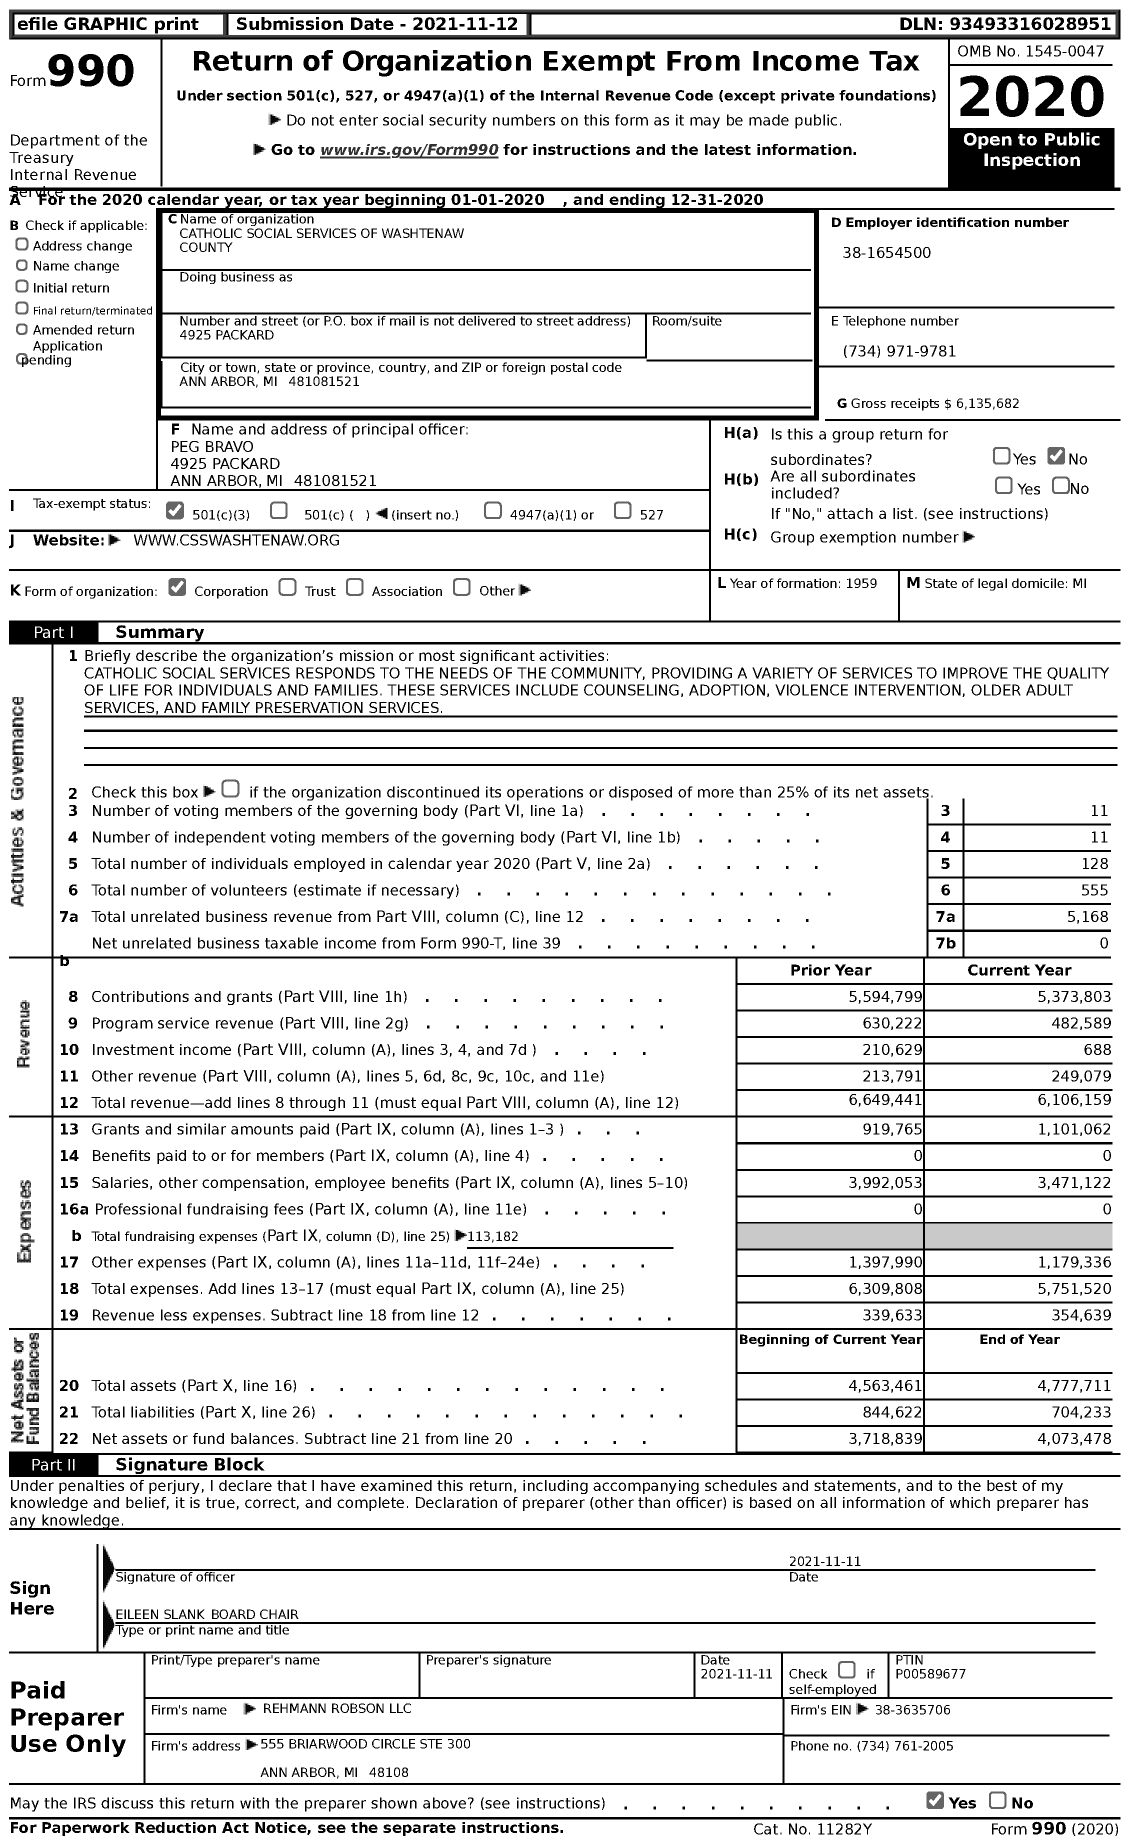 Image of first page of 2020 Form 990 for Catholic Social Services of Washtenaw County